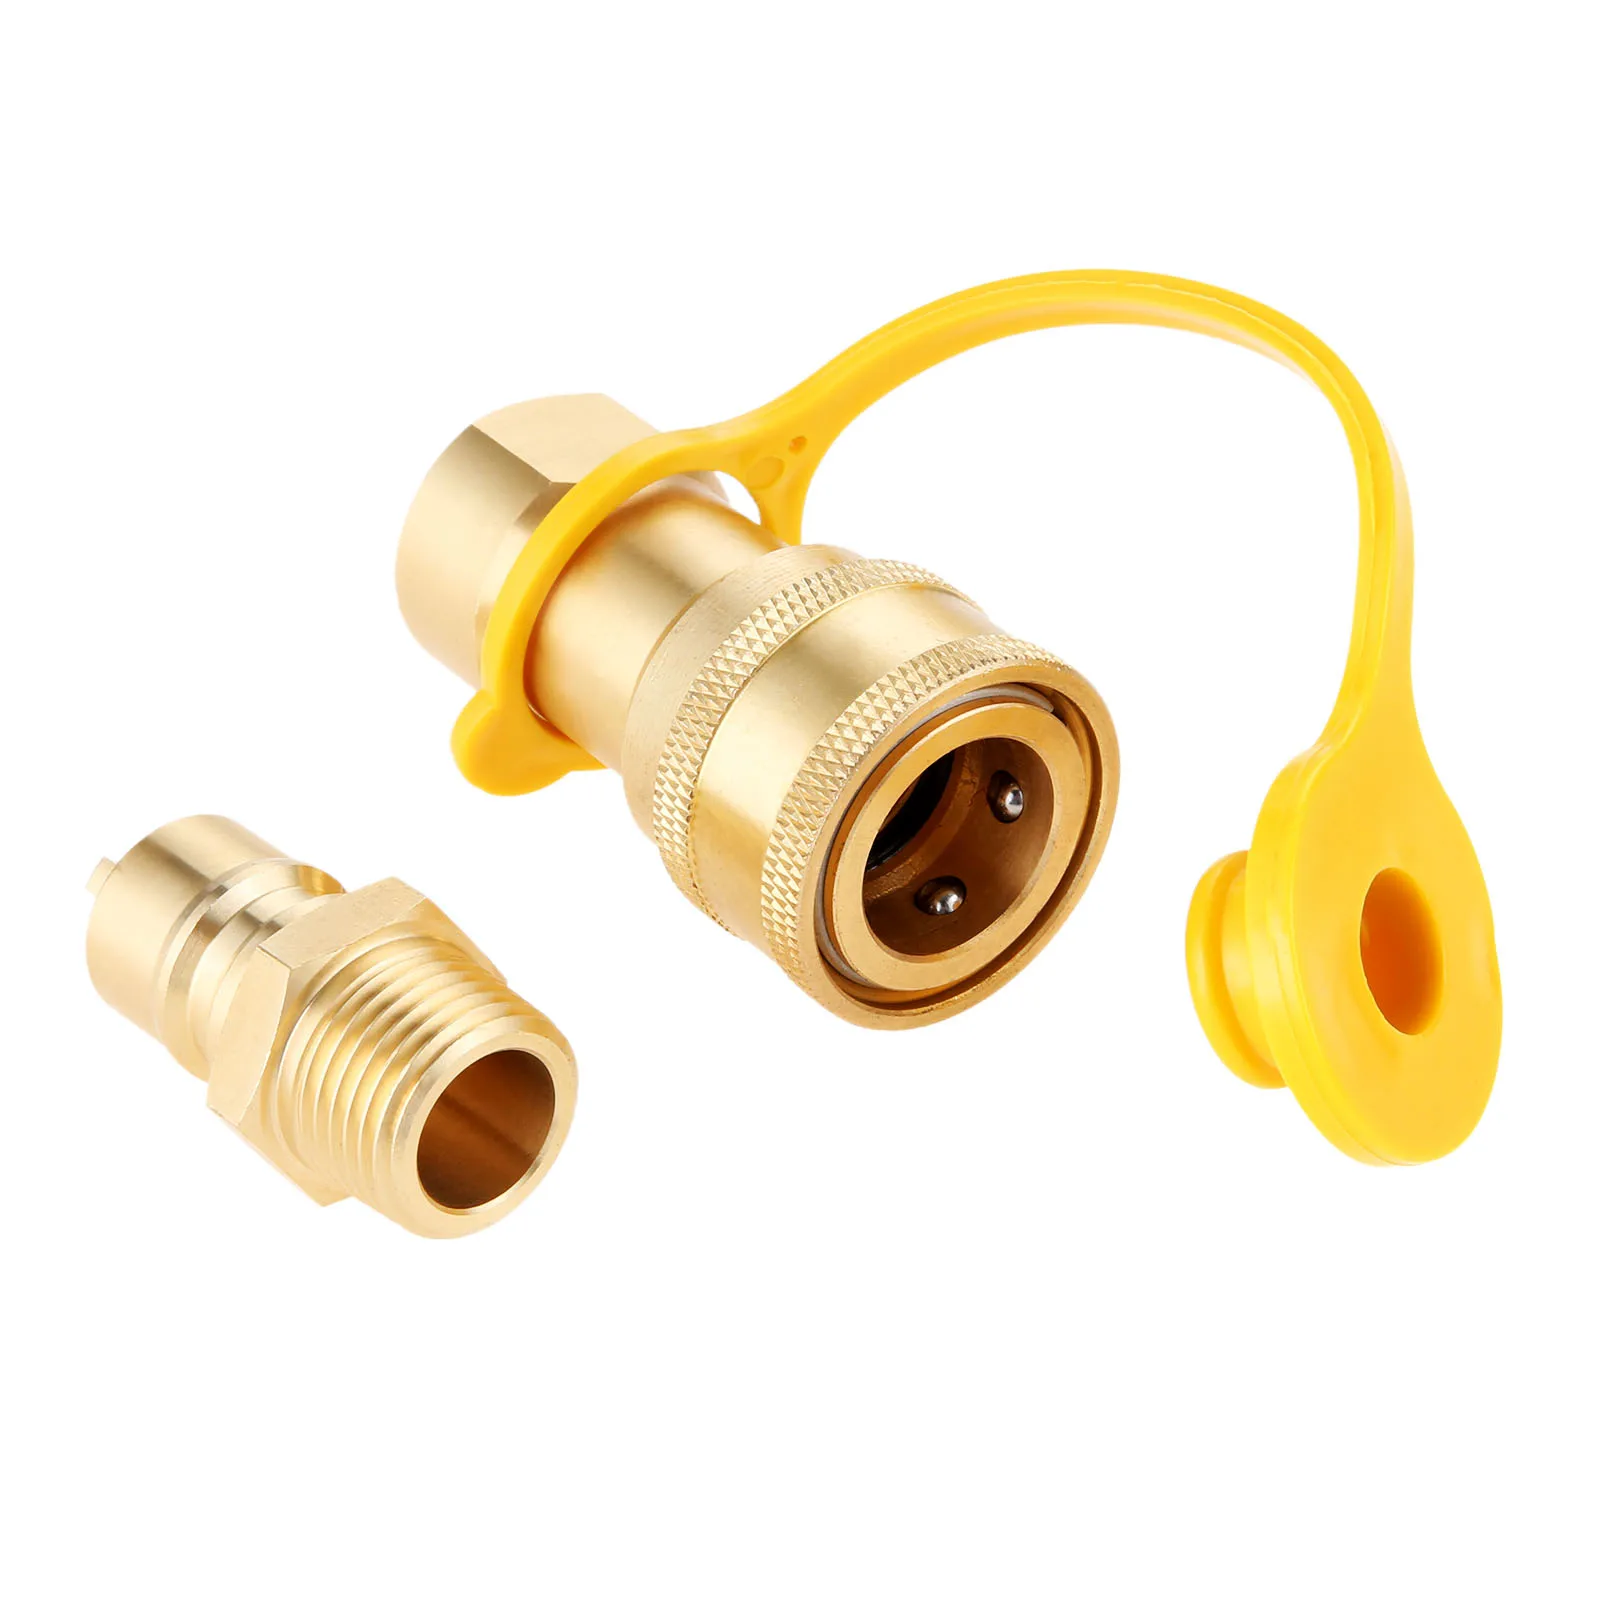 

Brass 1/2 inch Natural Gas Propane Quick Connect Adapter Disconnect Connector with Male Insert Plug 1/2" Gas Quick Connect Kit